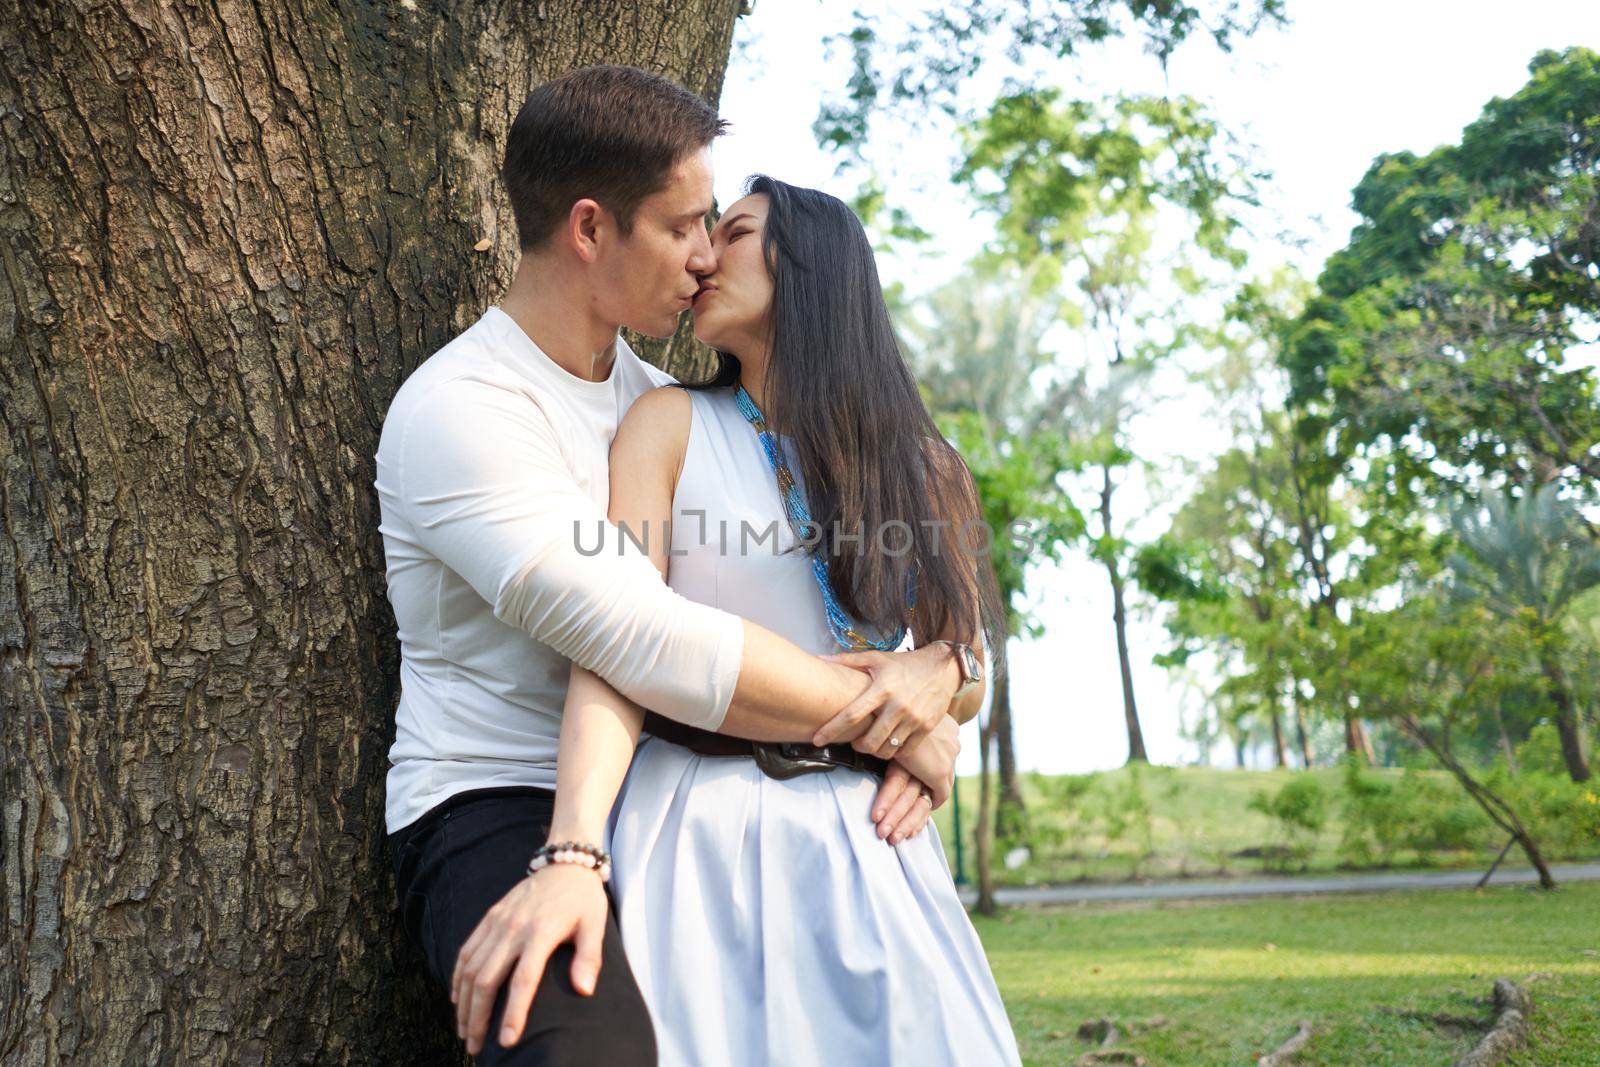 Pofile of a multiethnic newlywed couple kissing while leaning on a tree in a park